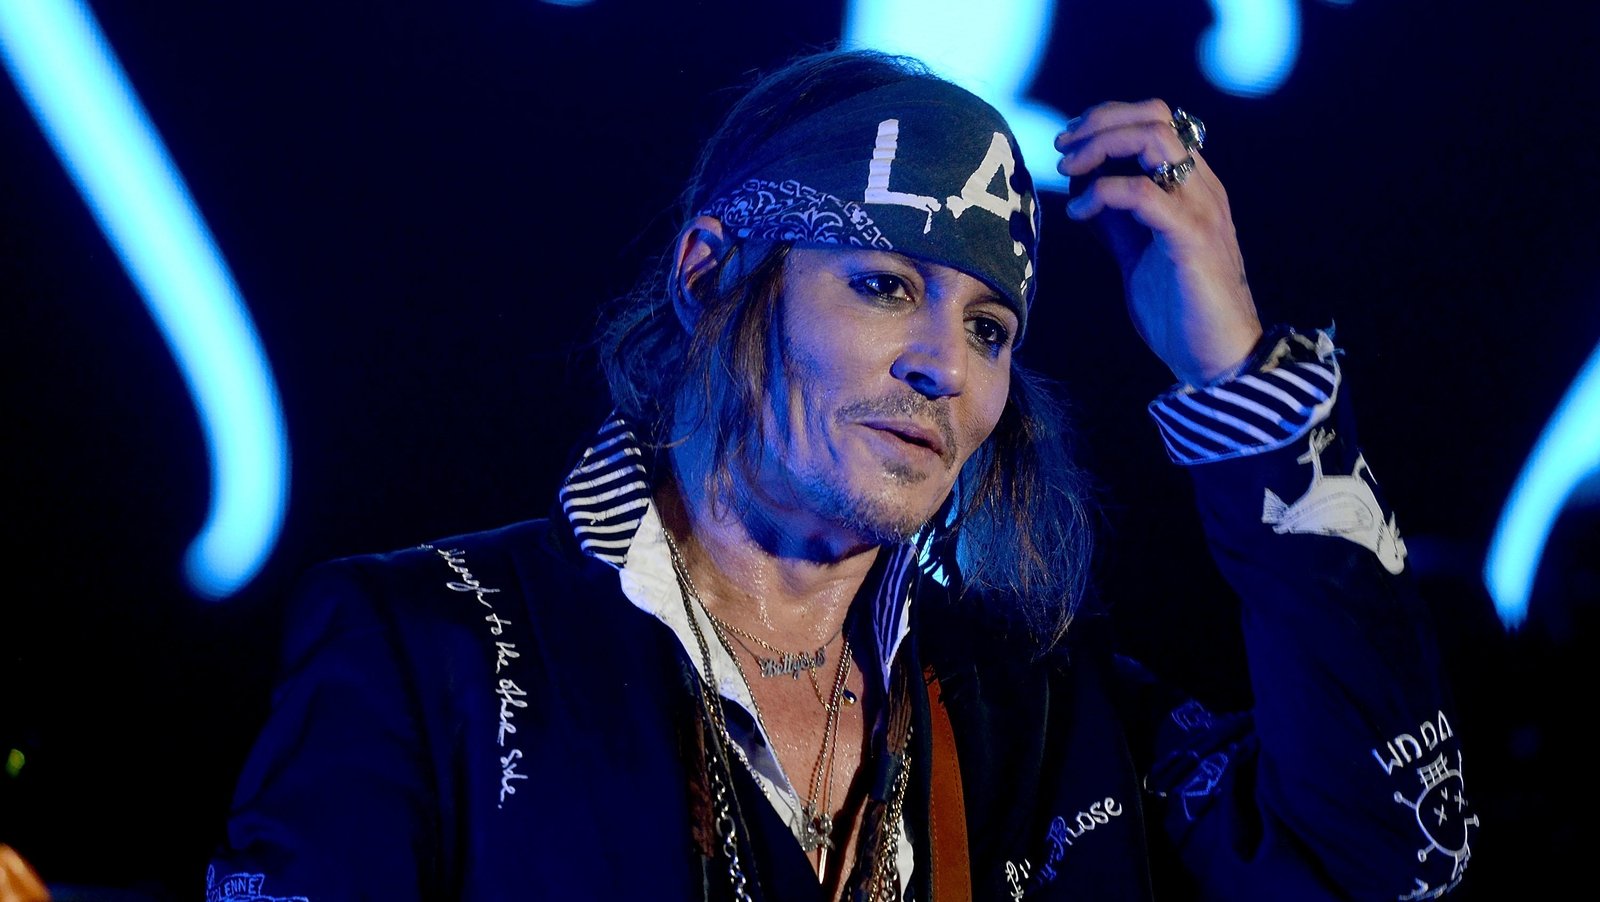 Depp to tour UK with rock band Hollywood Vampires